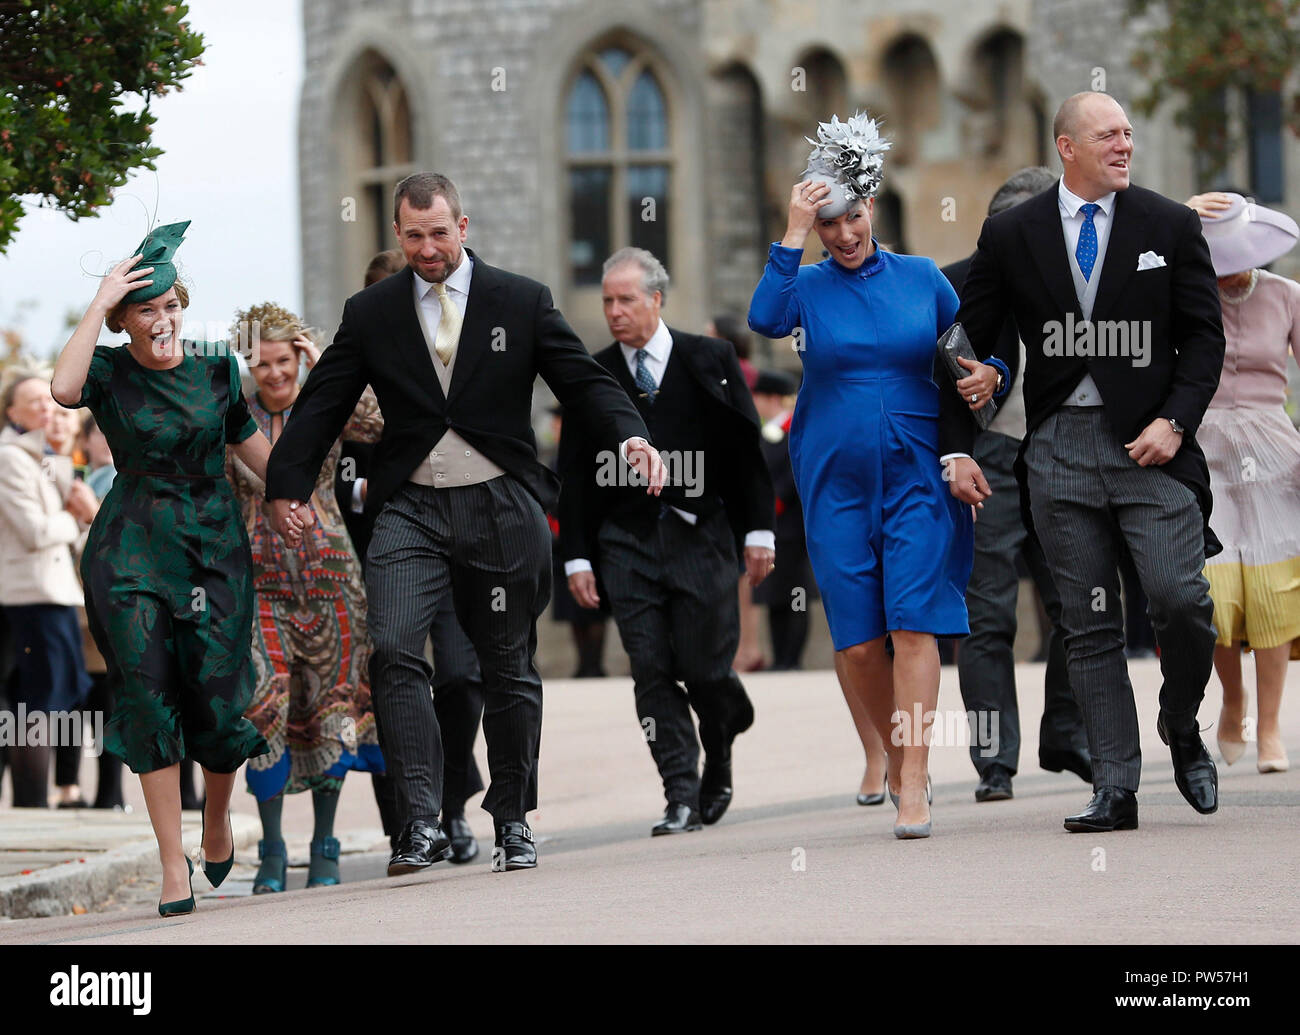 Autumn Phillips, with Peter Phillips, Zara Tindall, and Mike Tindal, hold  onto their hats as they arrive for the wedding of Princess Eugenie of York  and Jack Brooksbank in St George's Chapel,